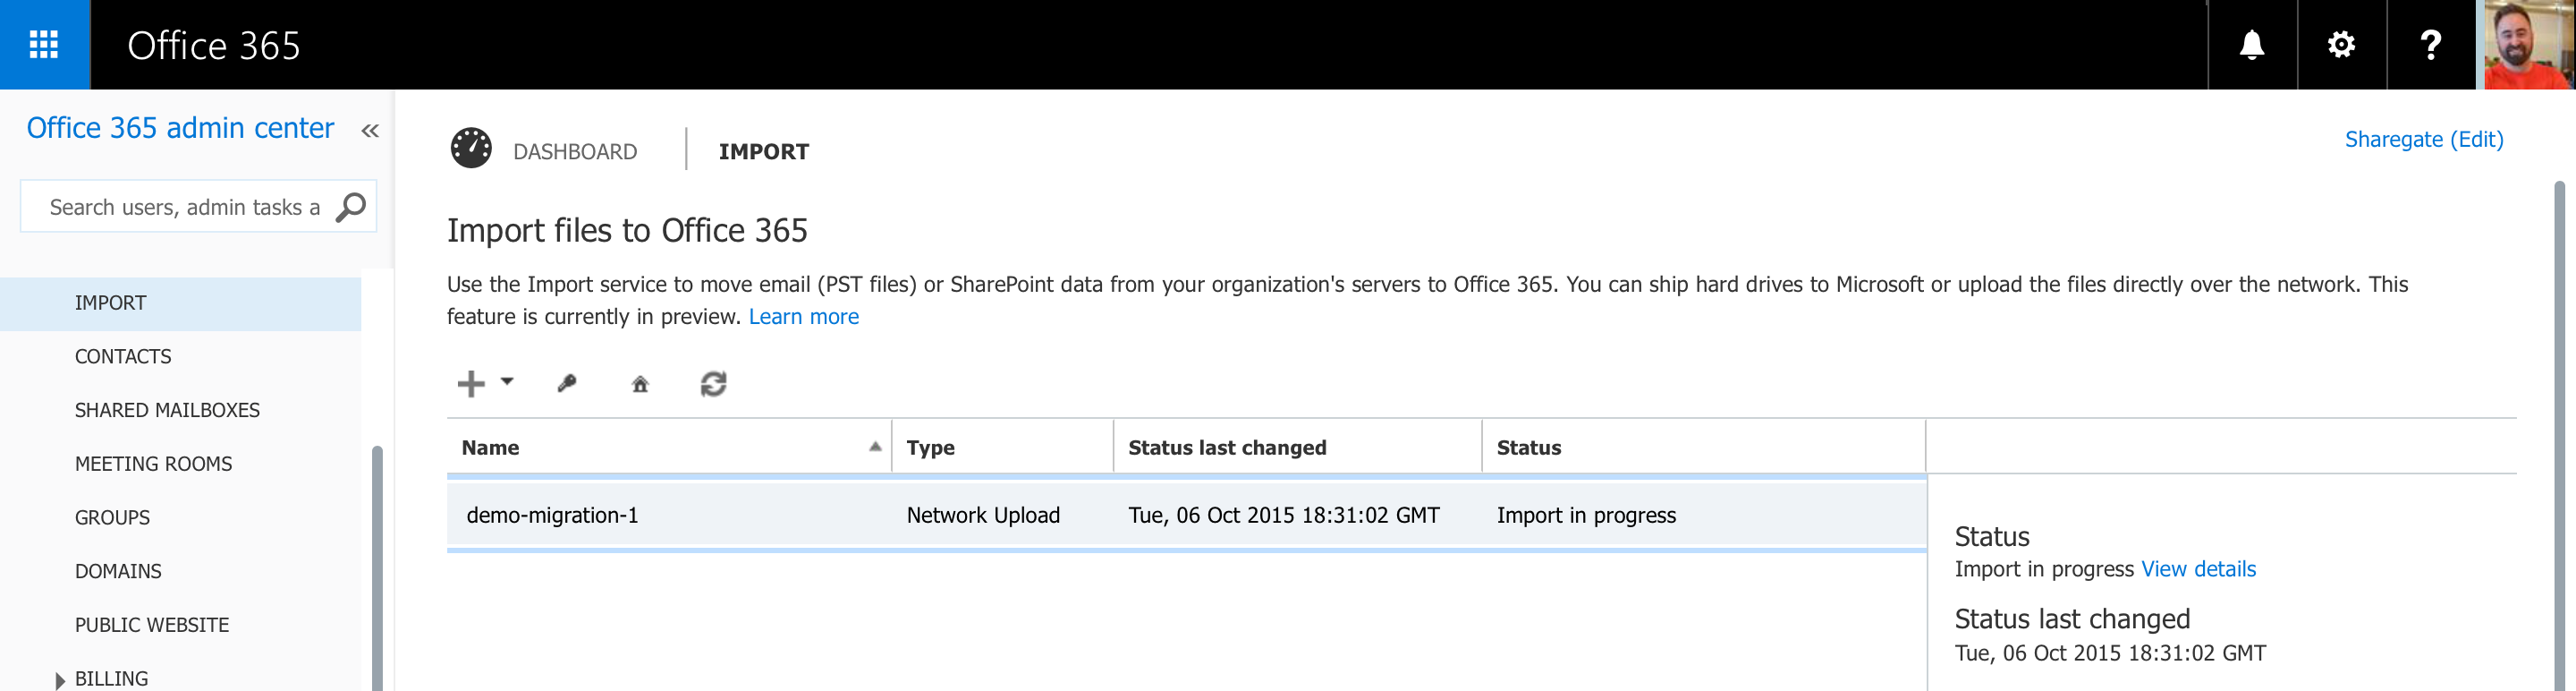 Office 365 import interface